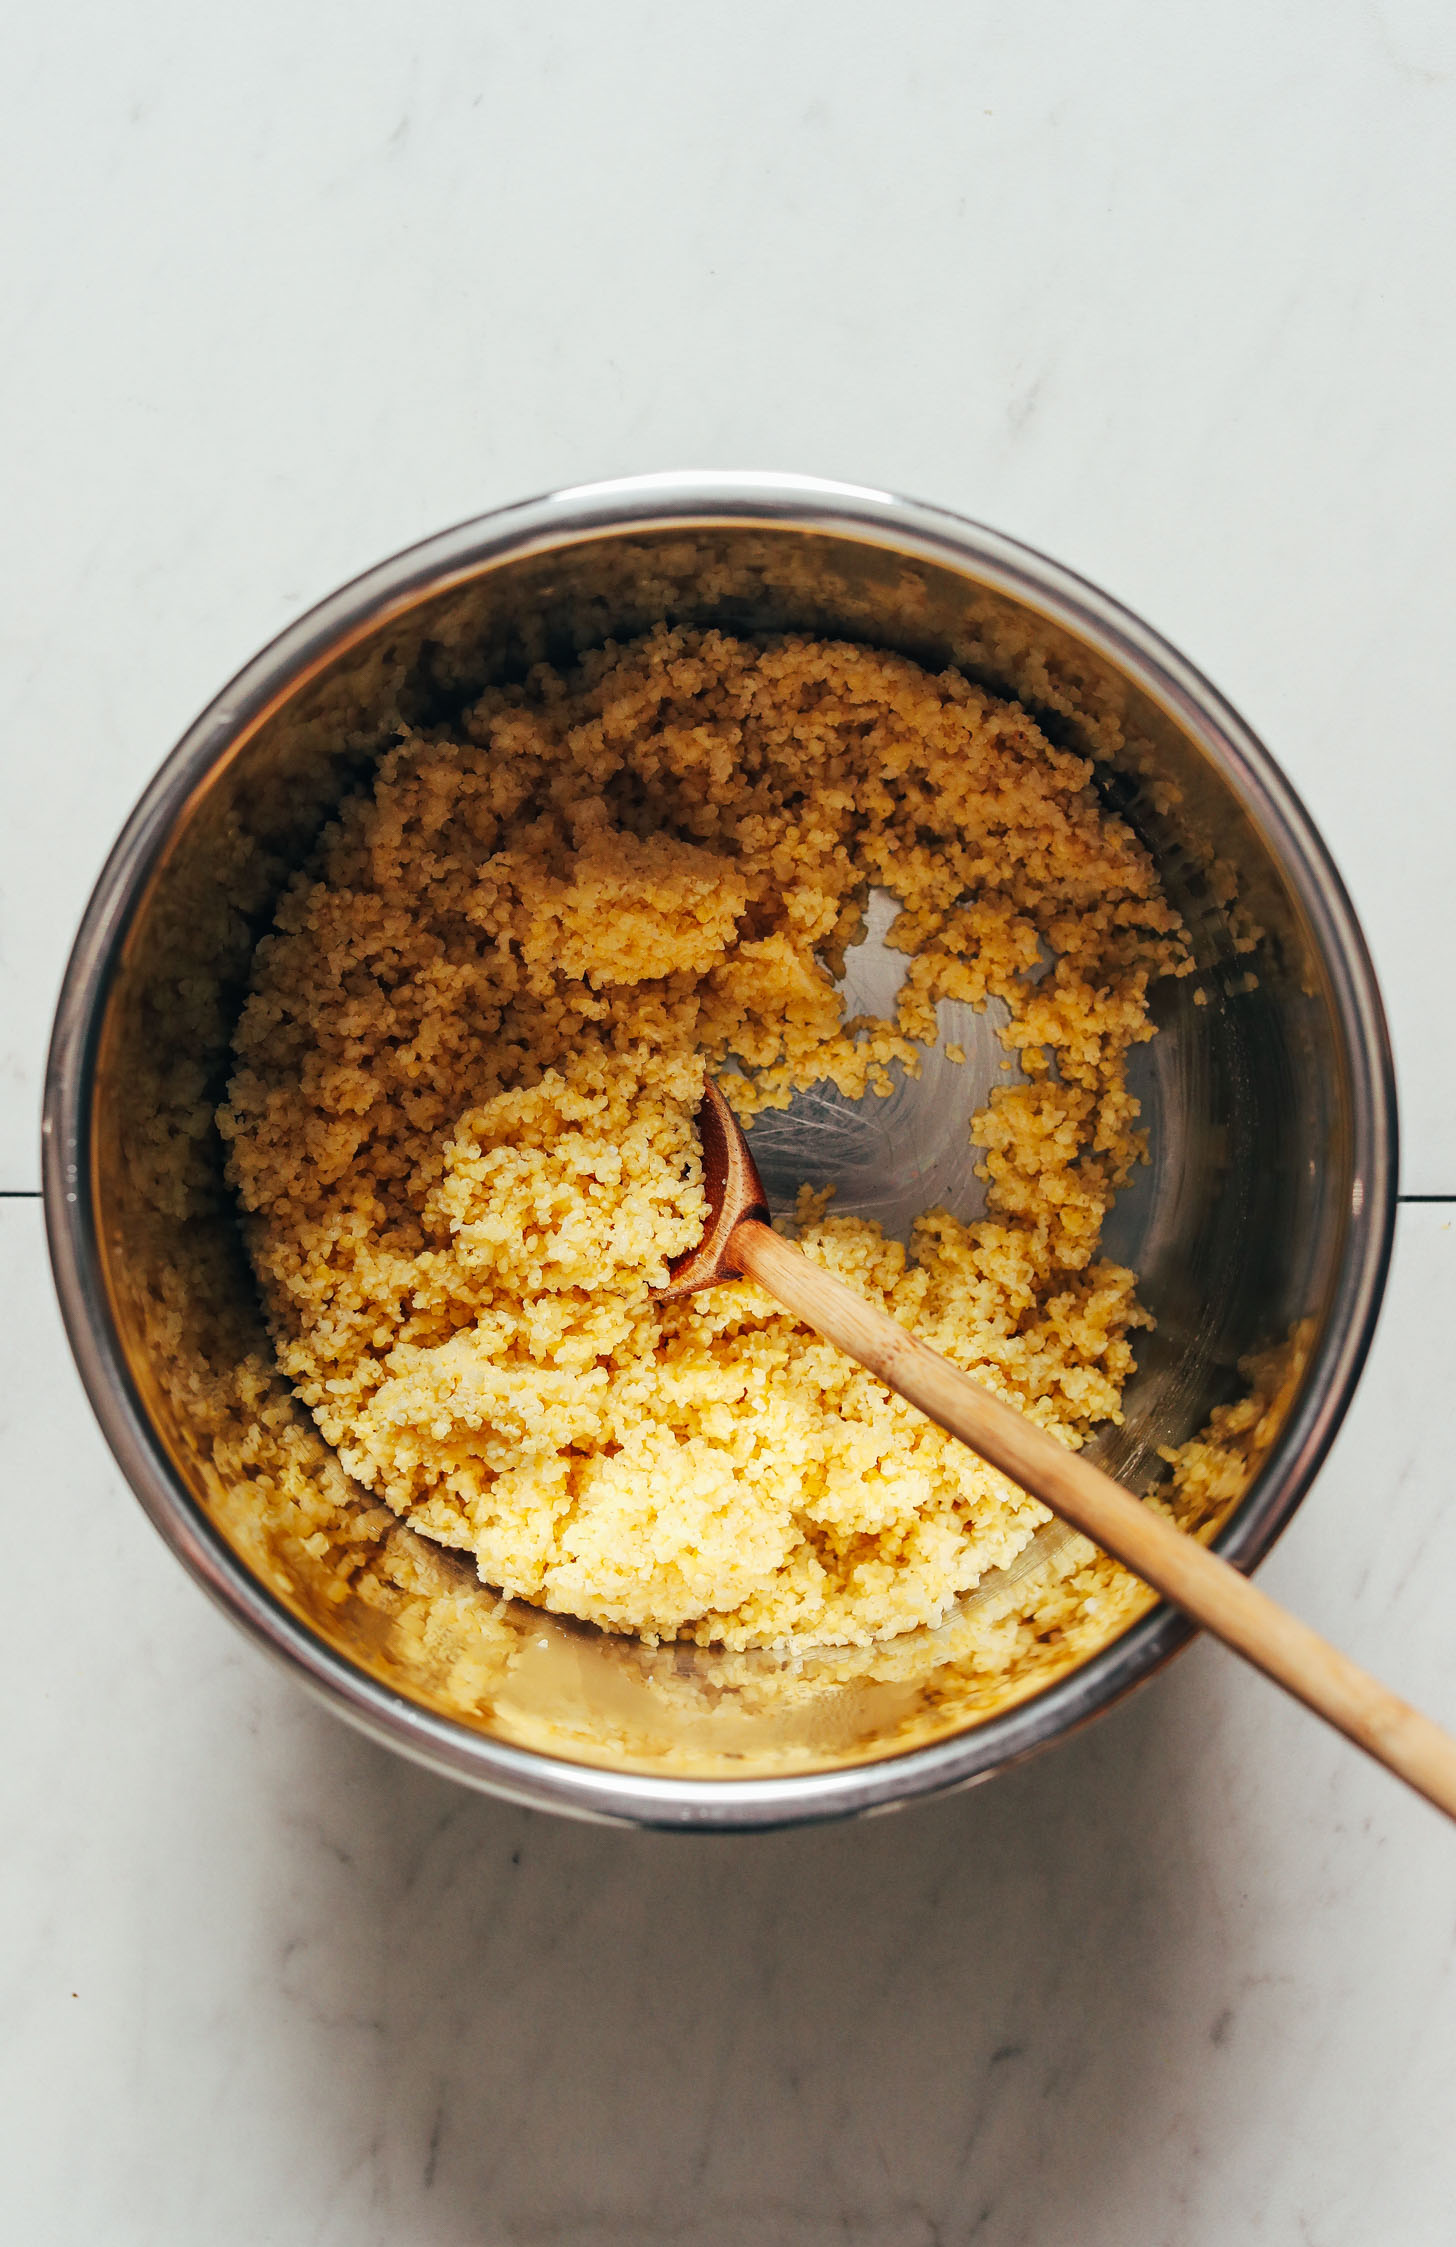 Wooden spoon in an Instant Pot with cooked millet